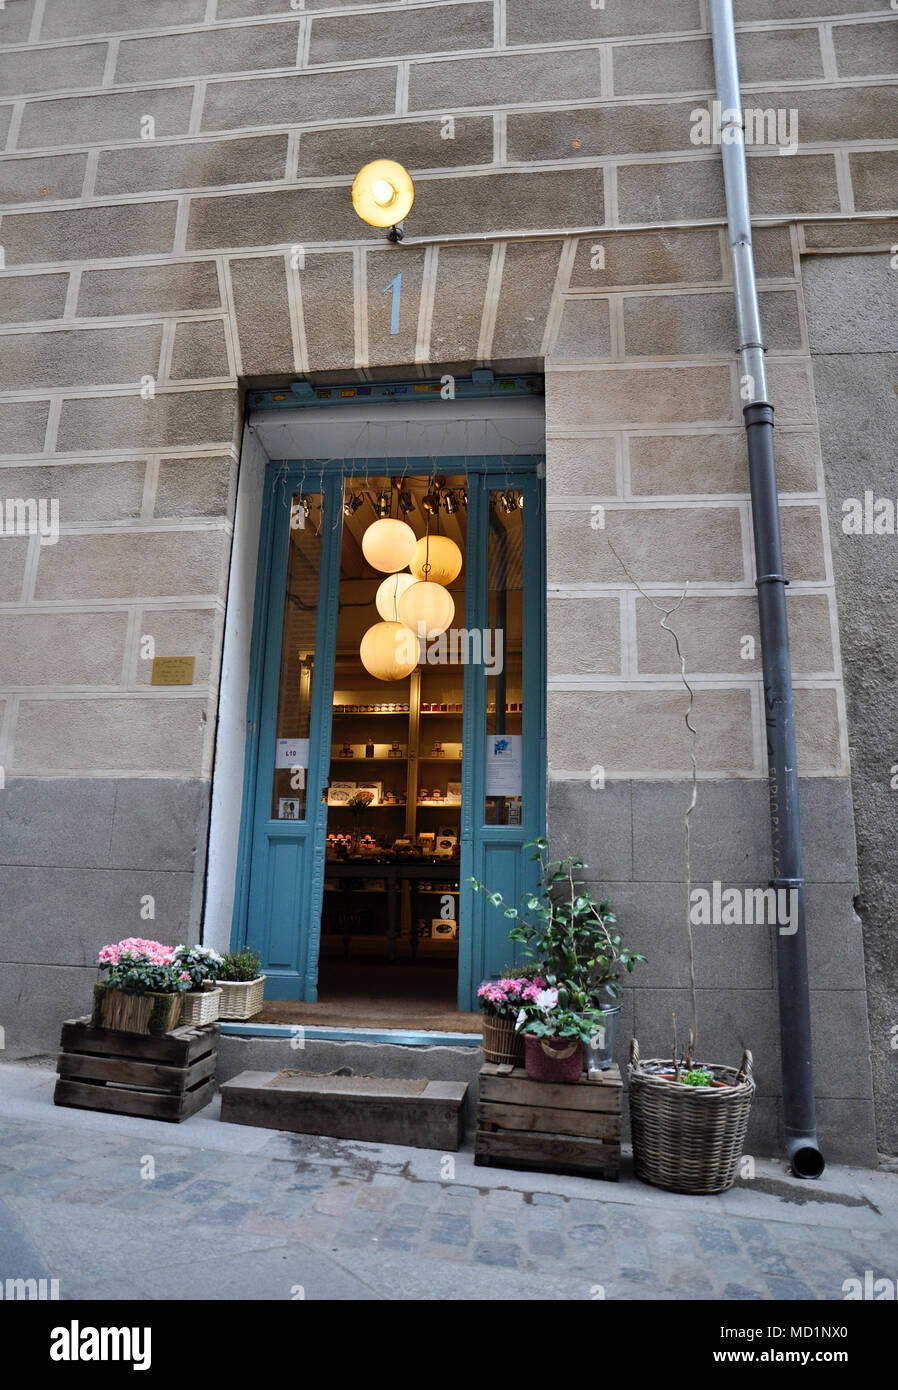 Storefront and entrance of El Jardín del Convento, Spanish convents and monasteries pastries rustic style shop, in Madrid old town (Spain) Stock Photo